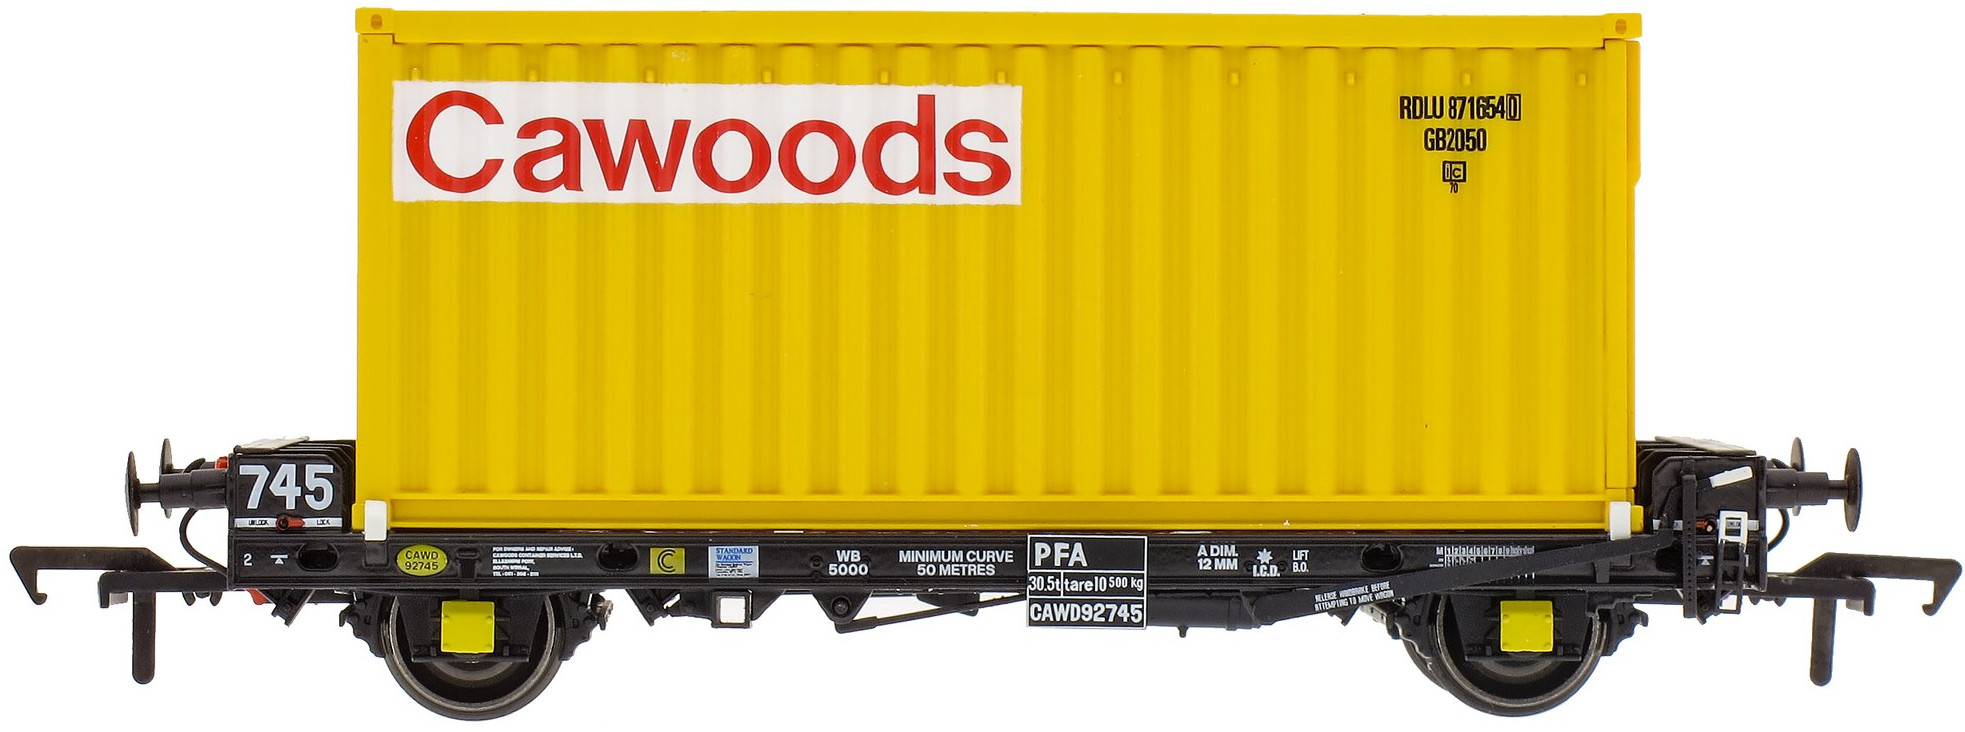 Accurascale ACC2088CWDT Flat Cawoods CAWD92745 Image